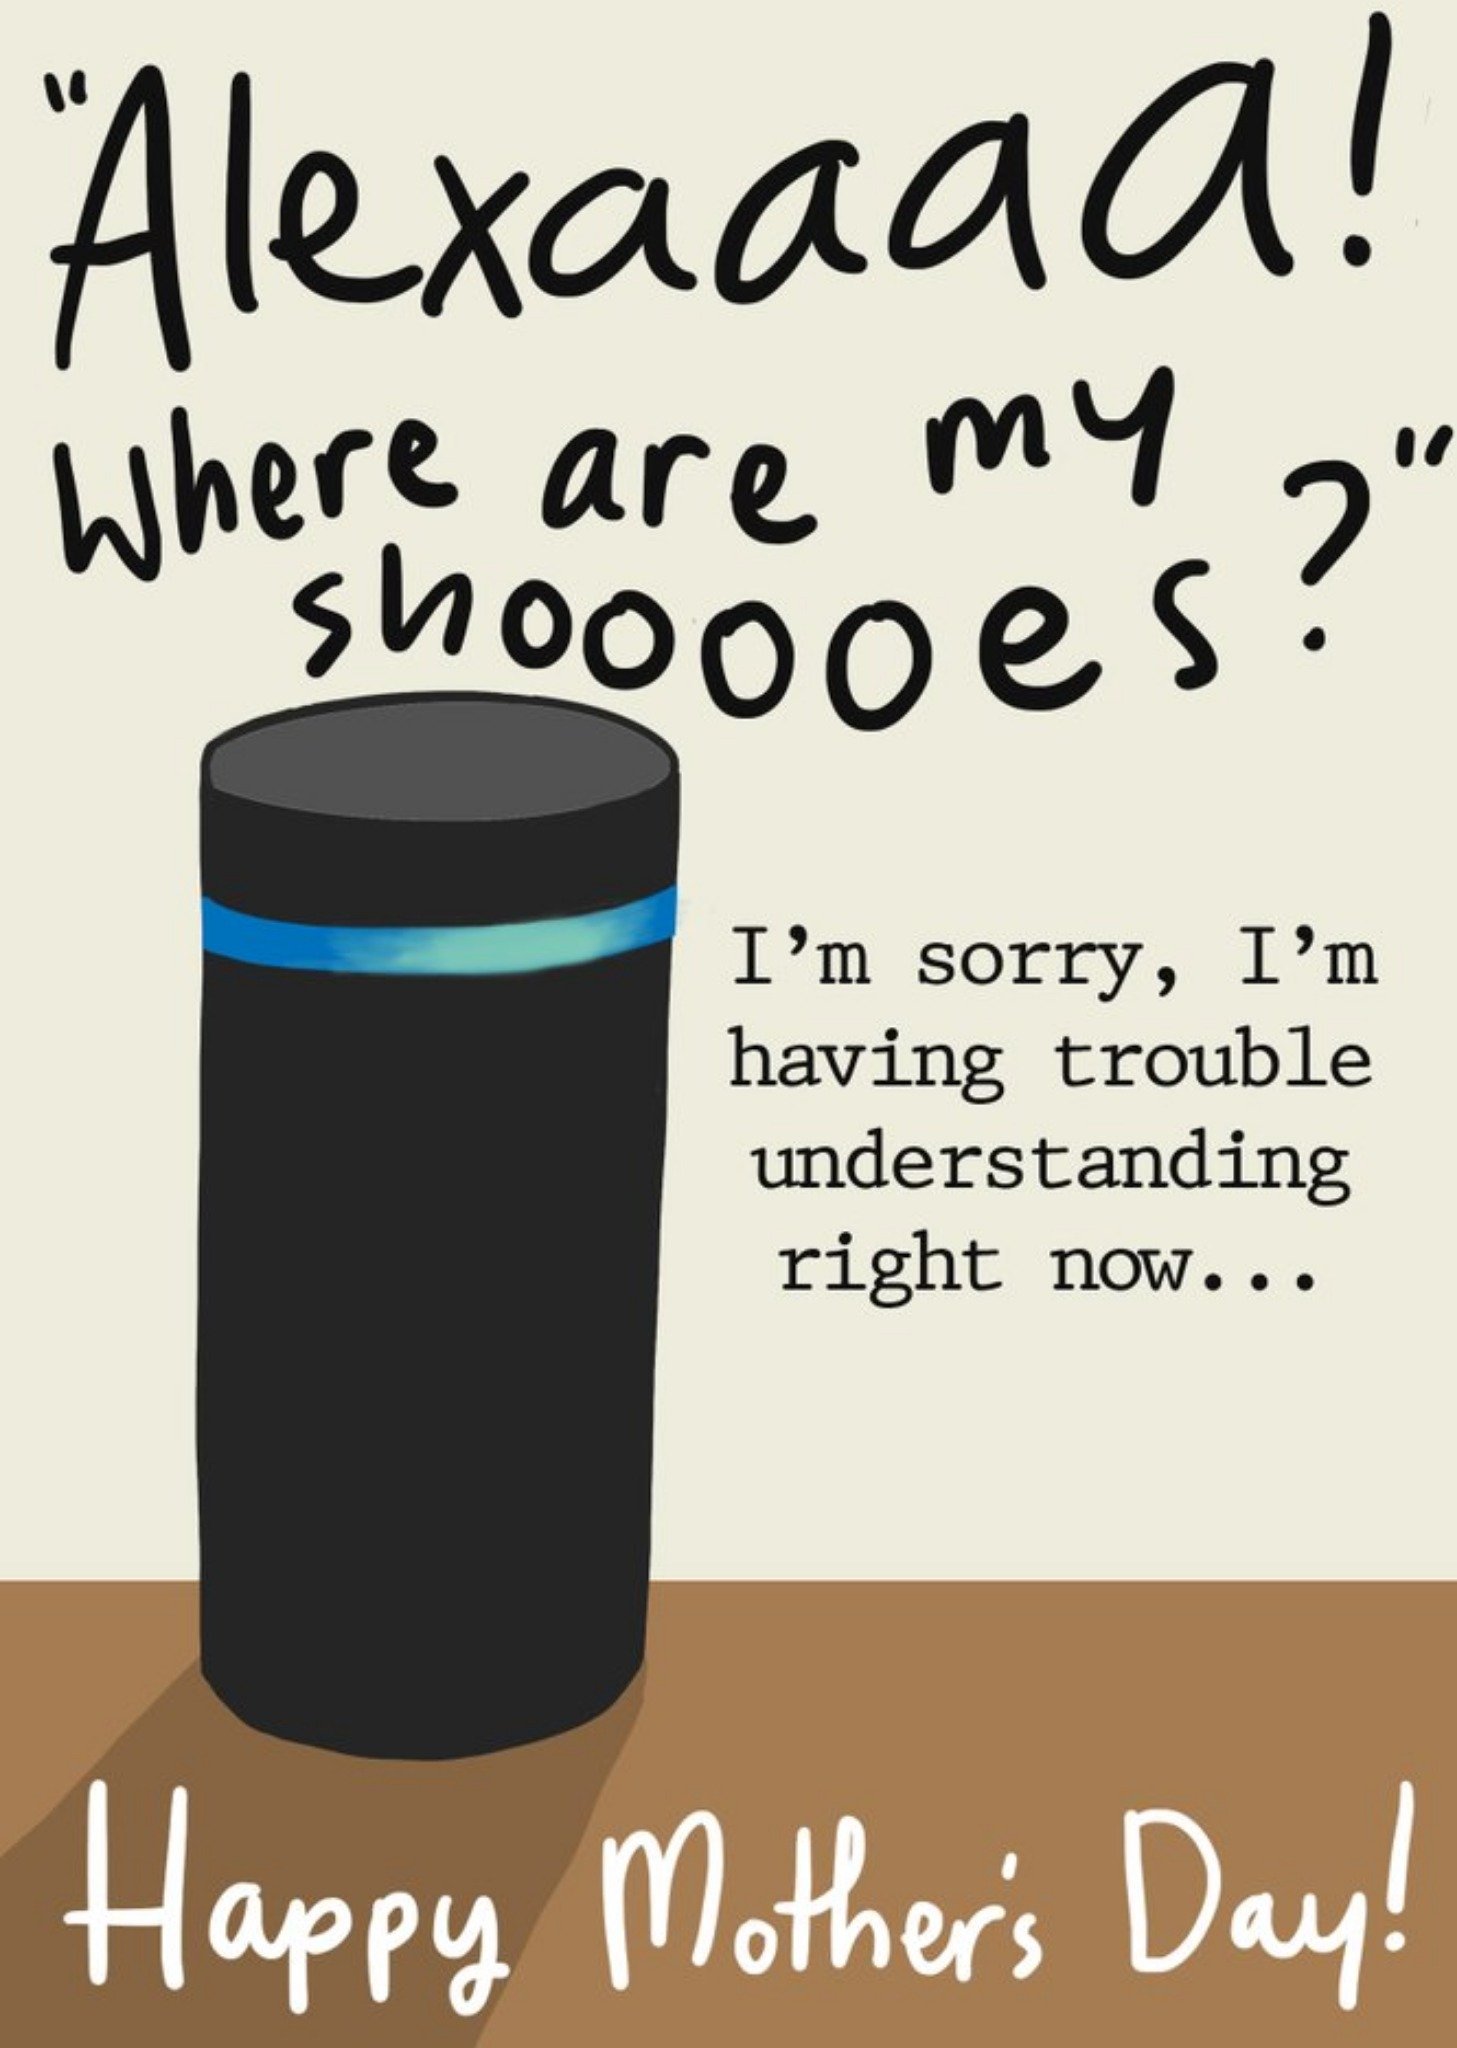 Mother's Day Card - Alexa - Artificial Intelligence, Large